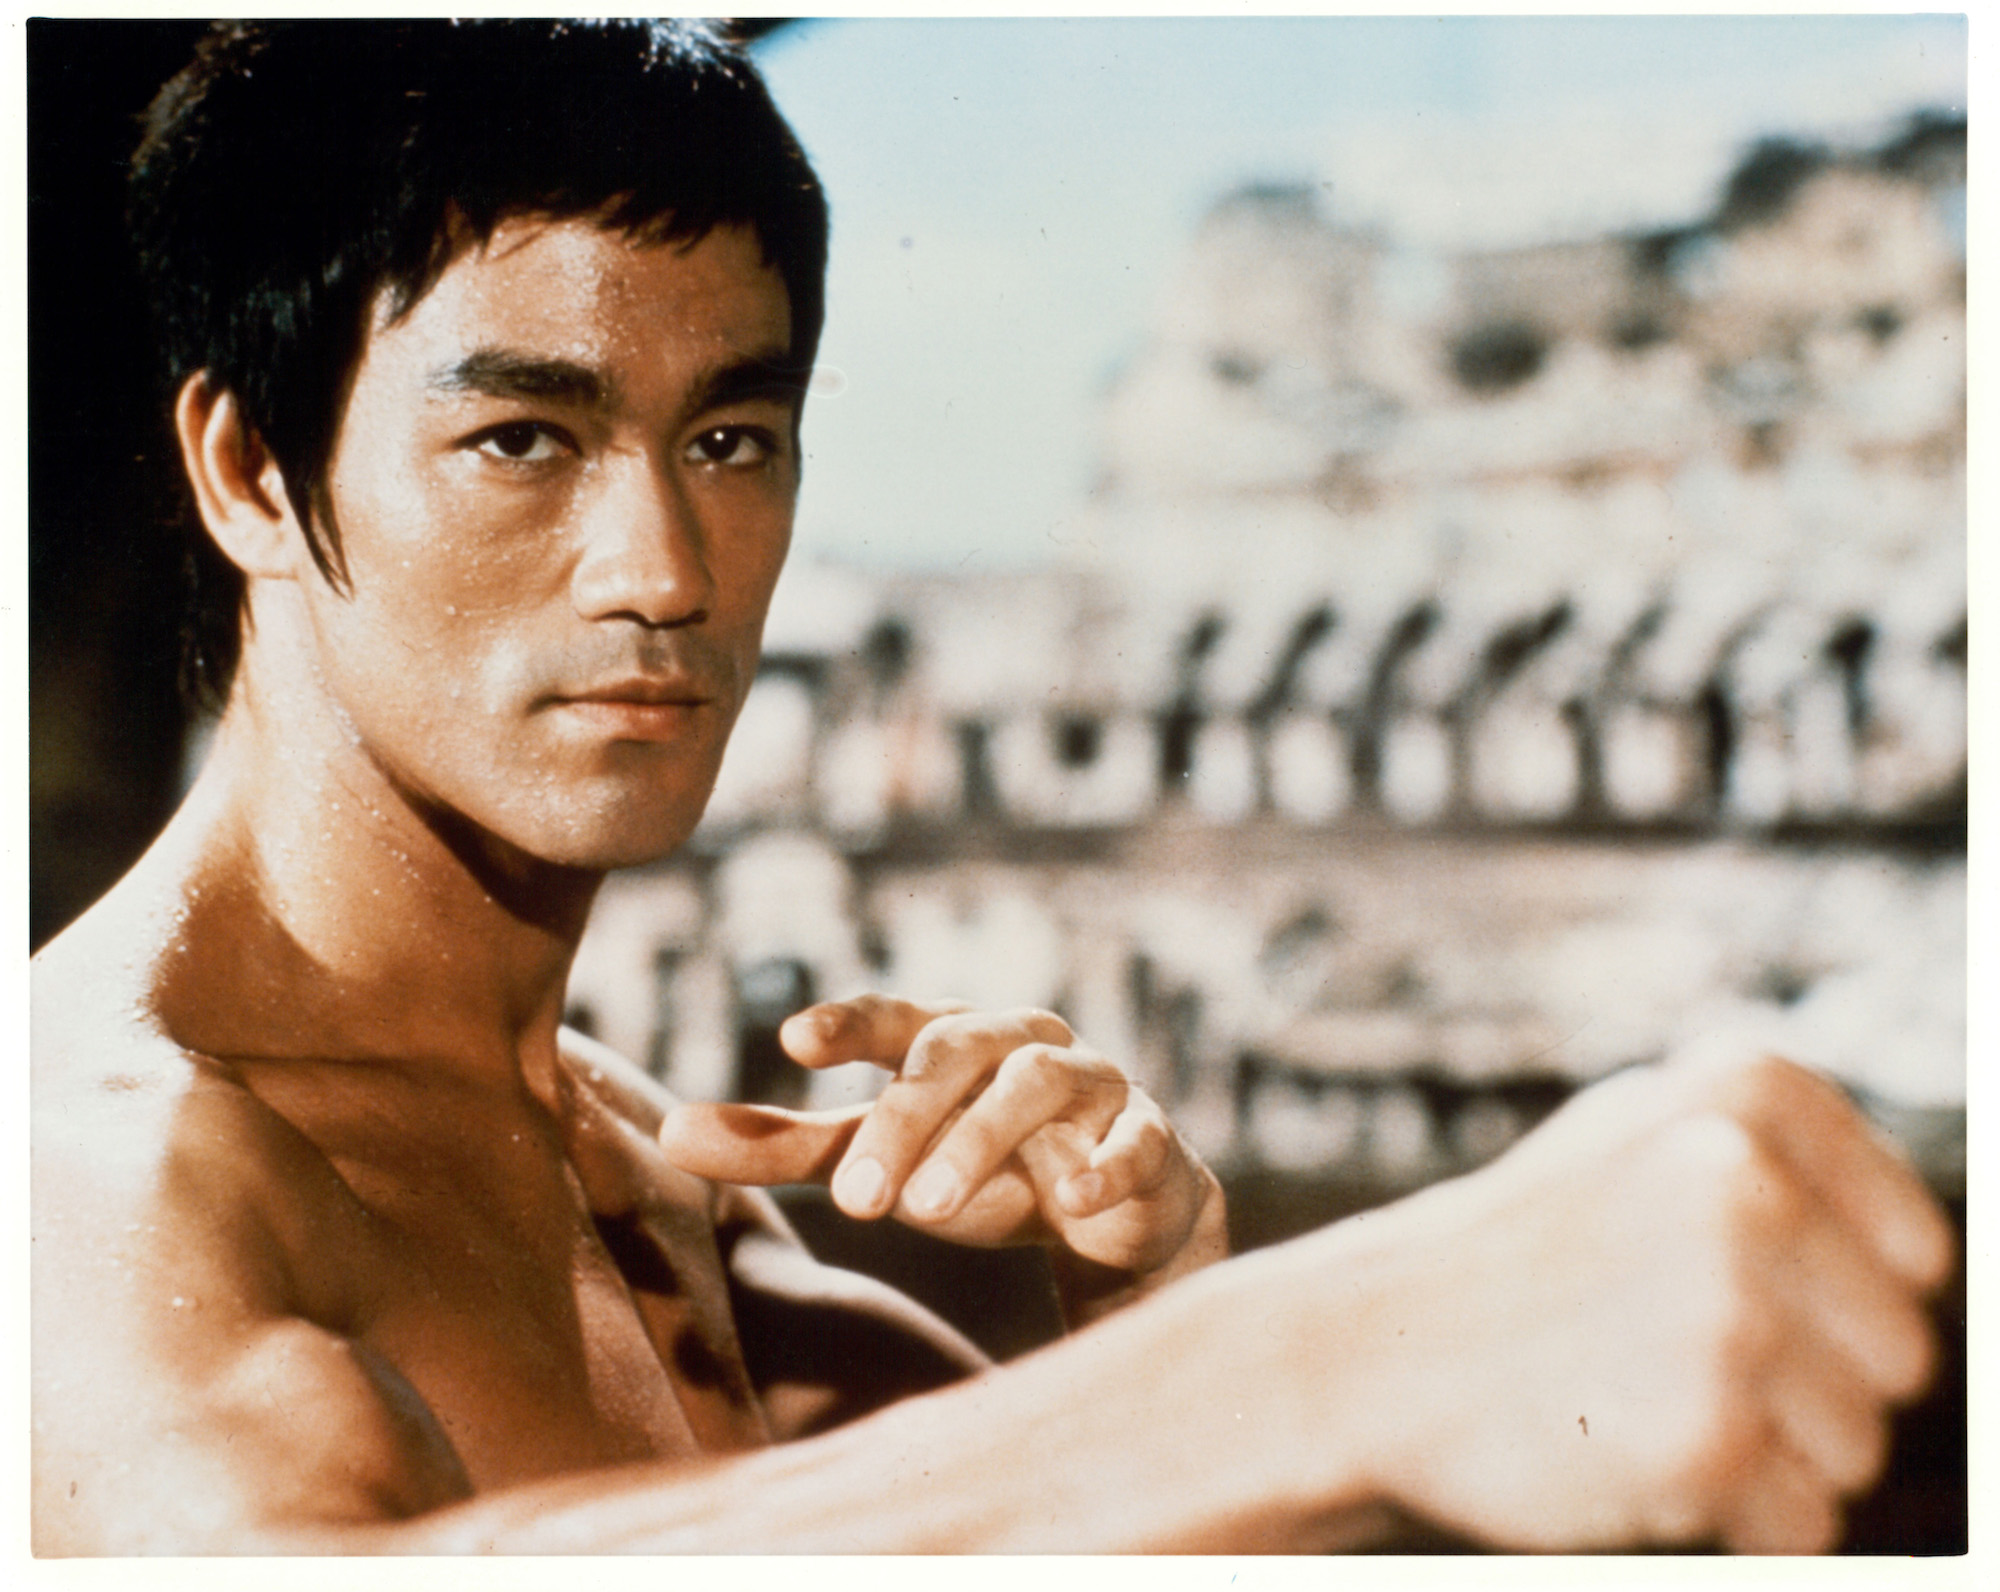 Bruce Lee readies his fists at the Colosseum